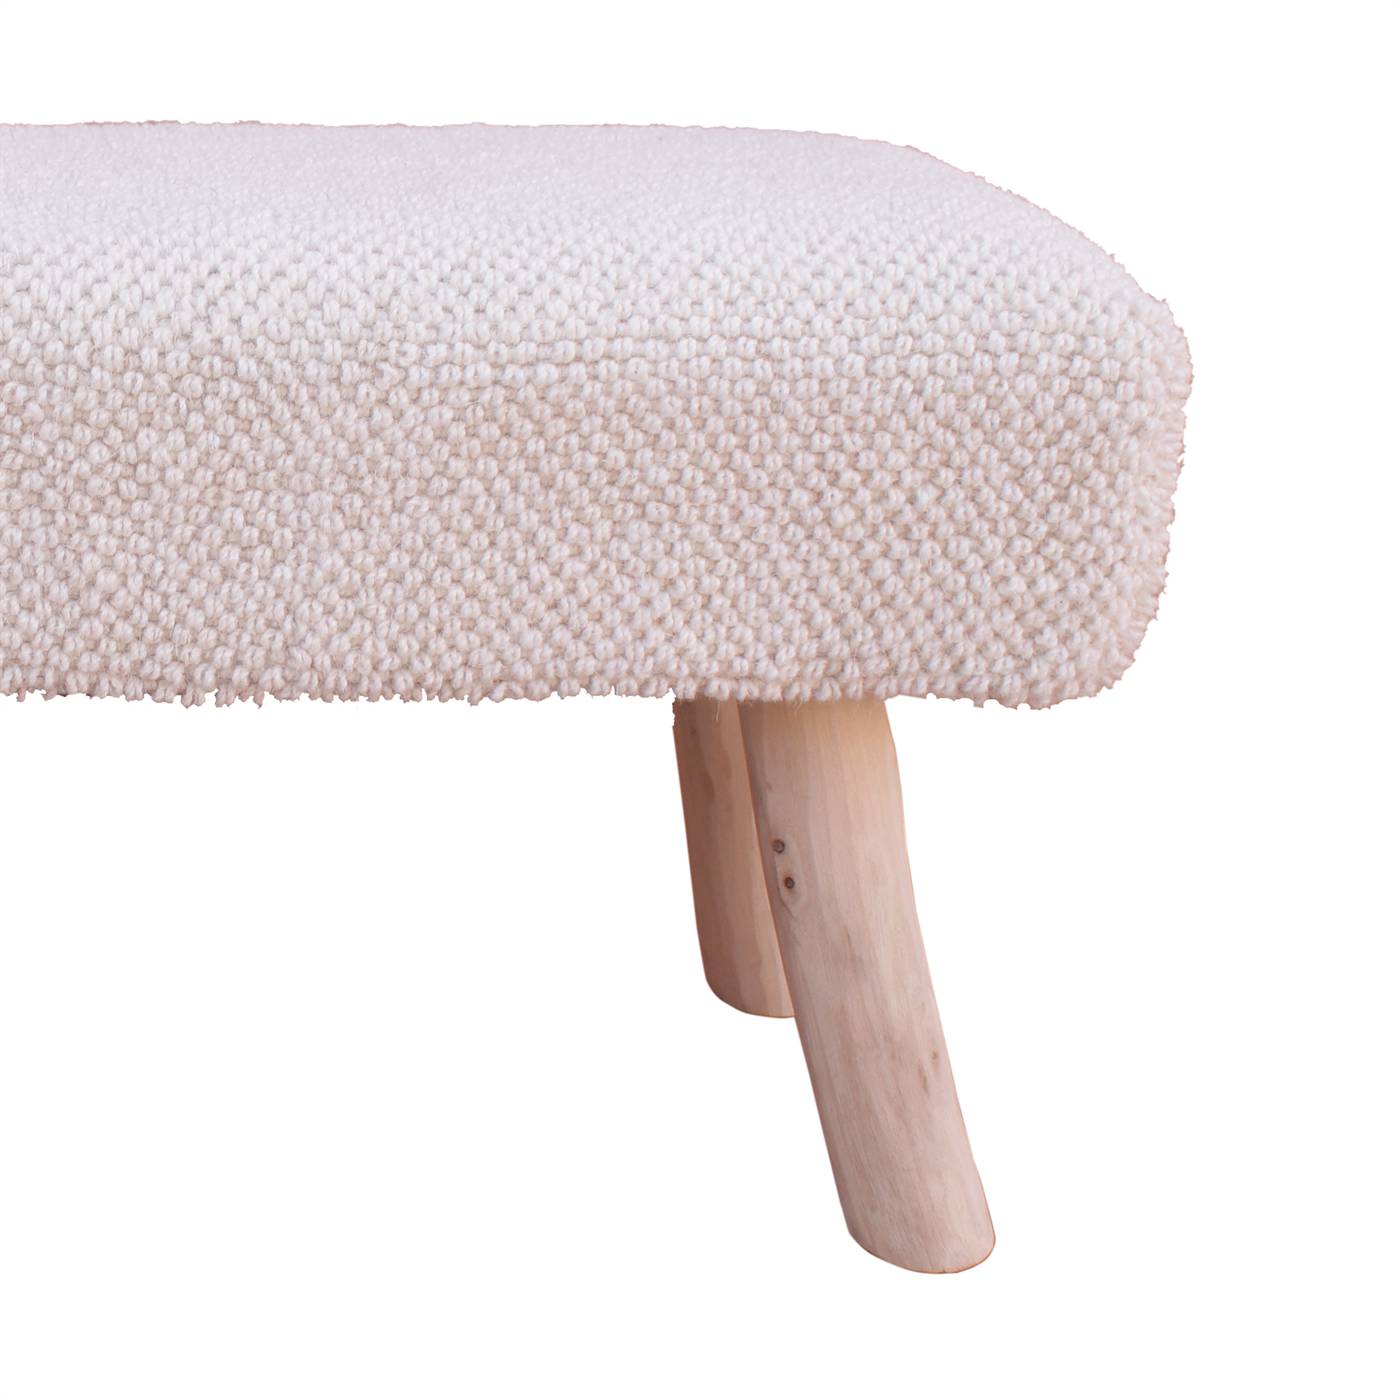 Cavern Bench, 80x30x40 cm, Natural White, Wool, Hand Woven, Handwoven, All Loop